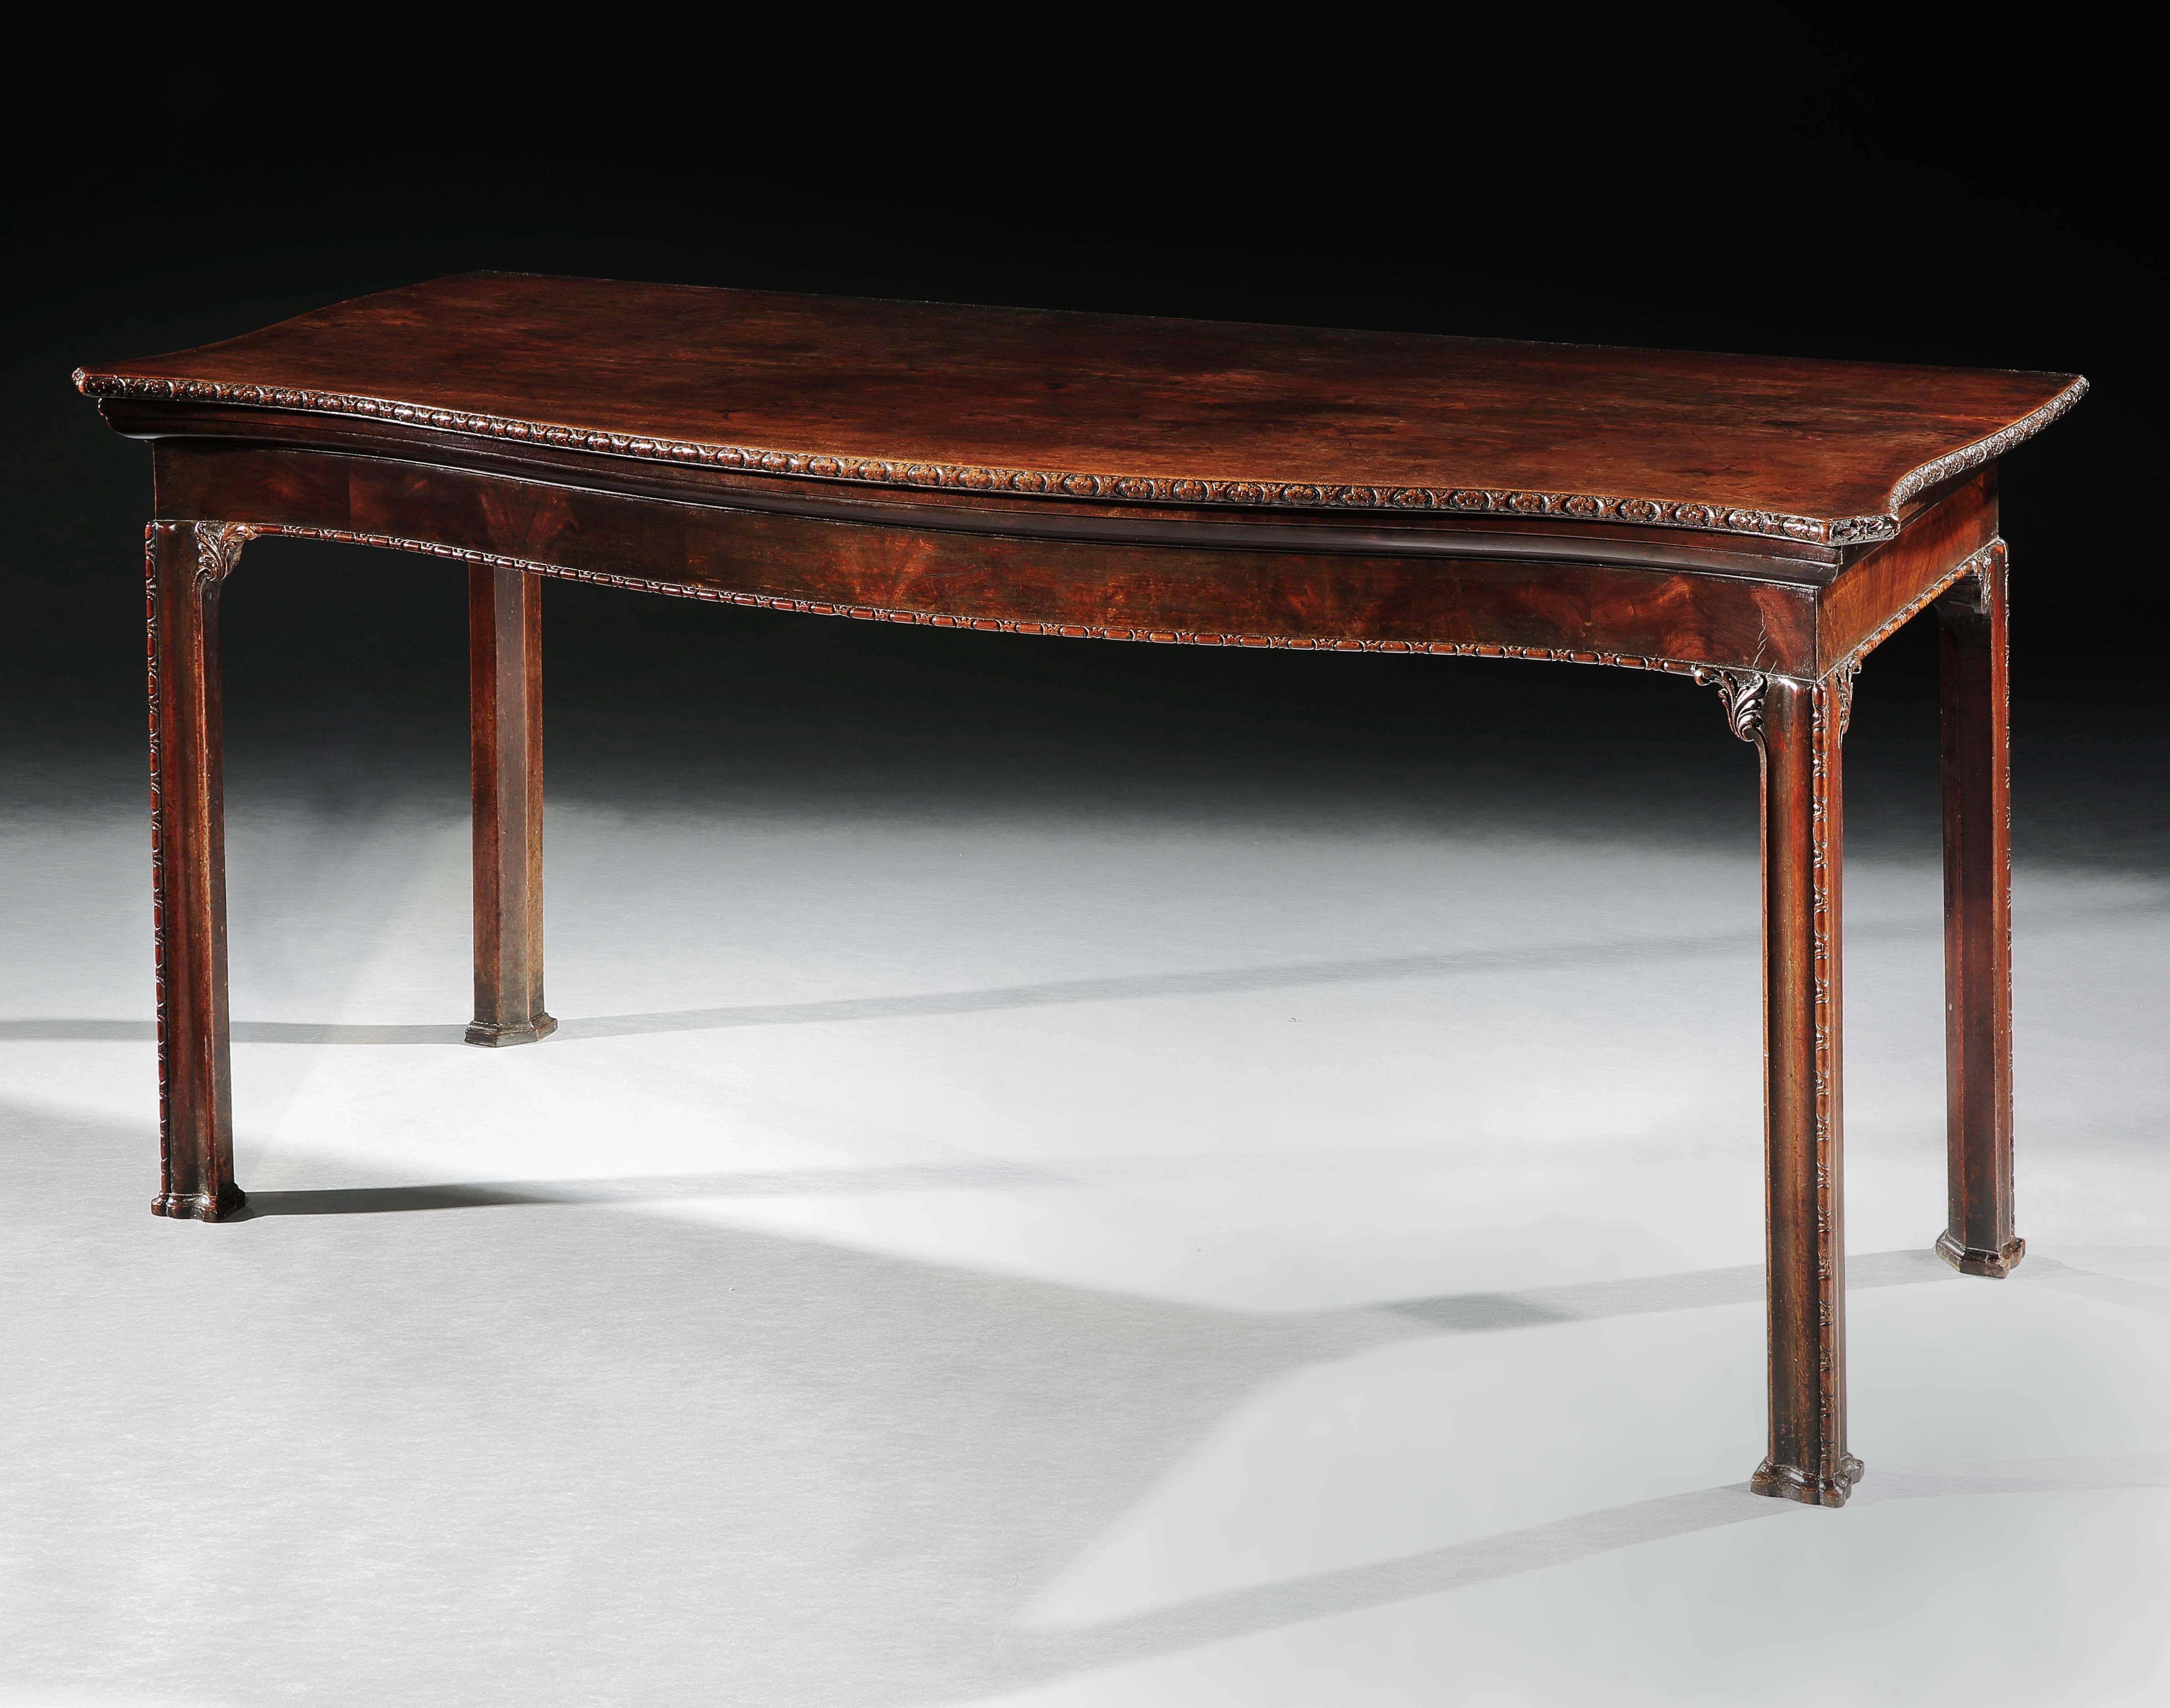 A fine George III mahogany serving table, the serpentine top, with a carved edge above a conforming frieze. The legs all similarly carved, and headed by brackets and terminating in block toes.